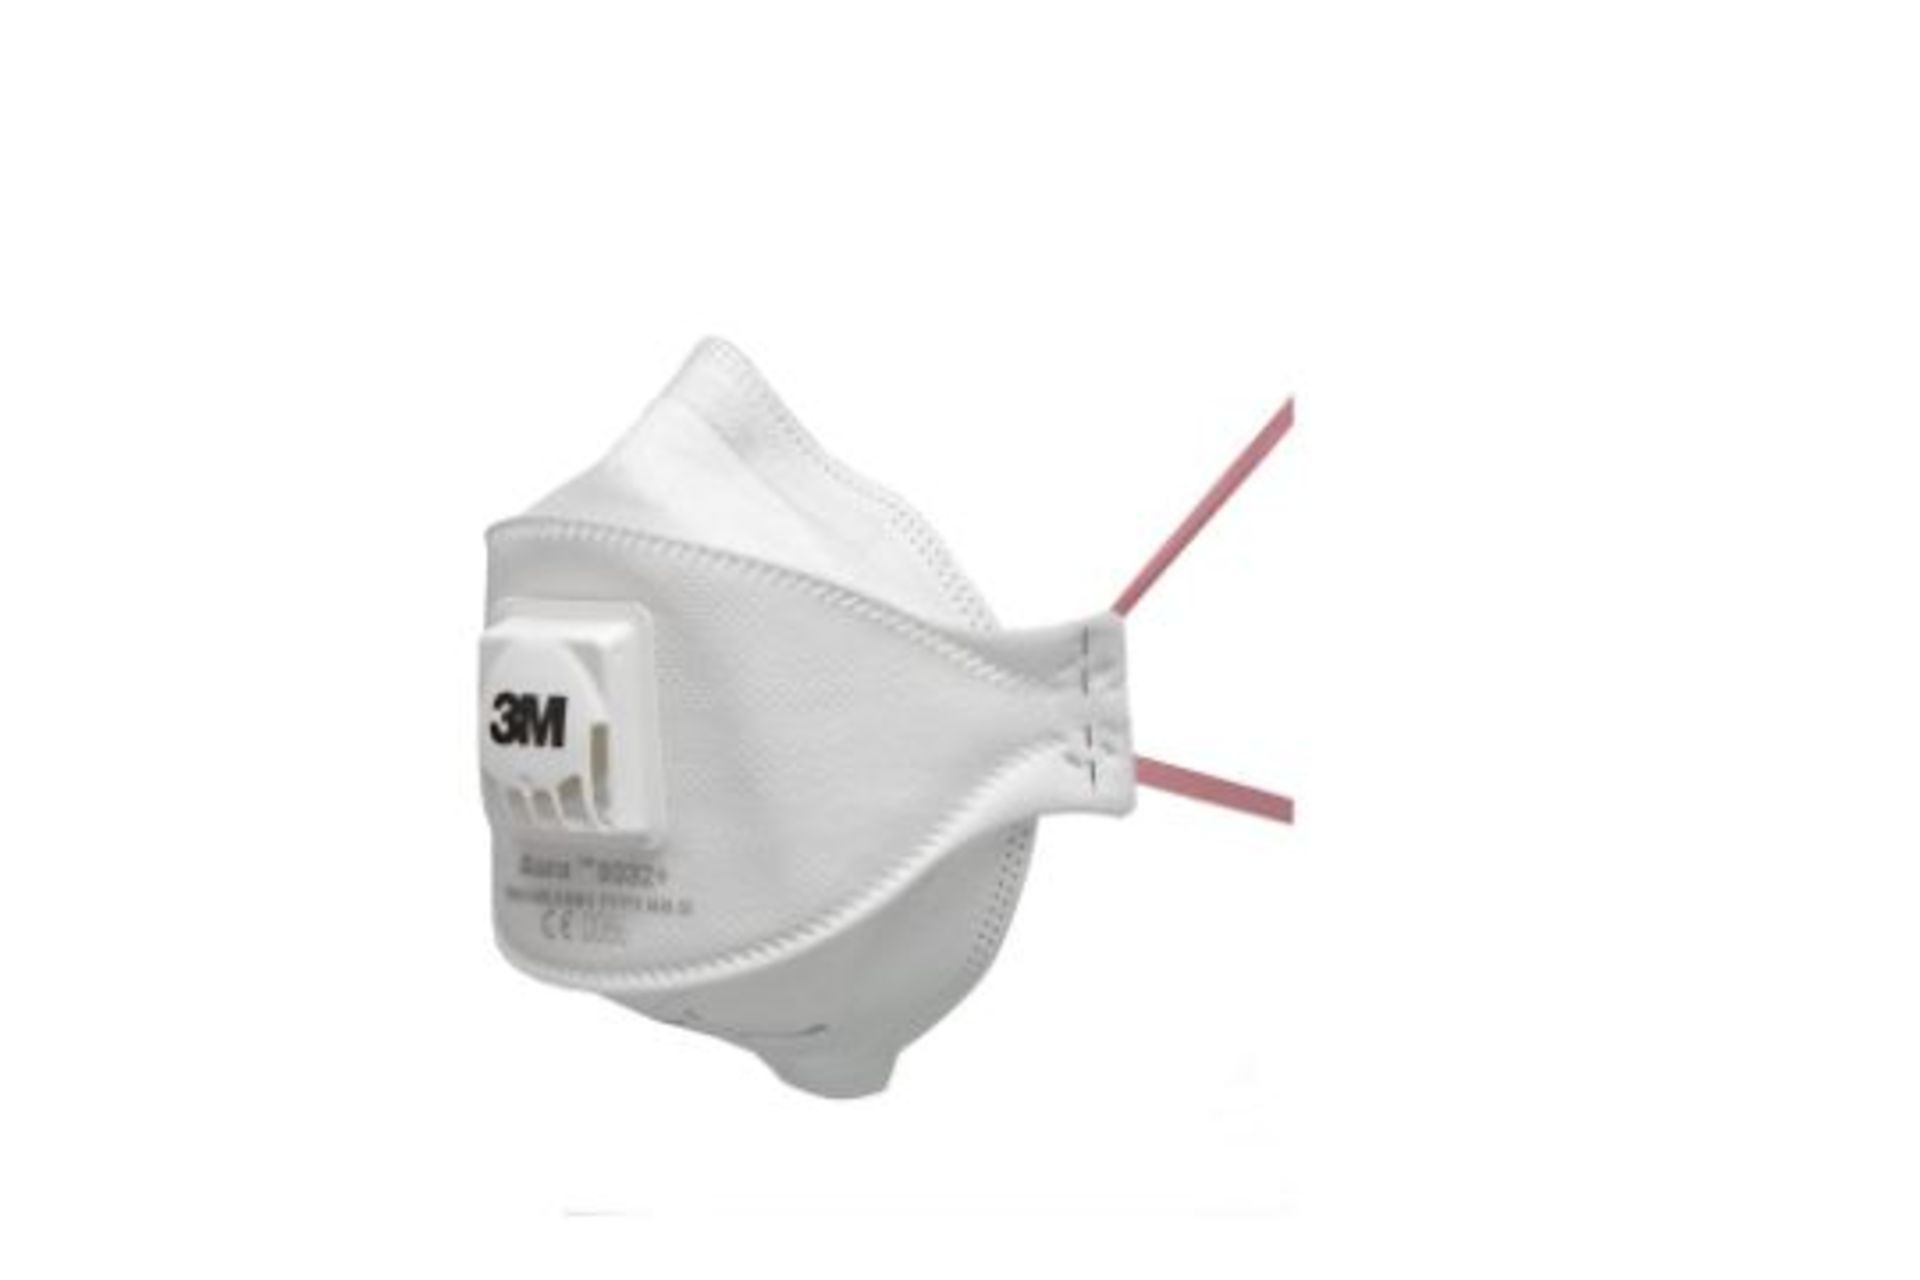 TRADE LOT 60 X BRAND NEW PACKS OF 10 3M AURA 9332 DISPOSABLE MASK, VALVED, WHITE FFP3, FILTERS